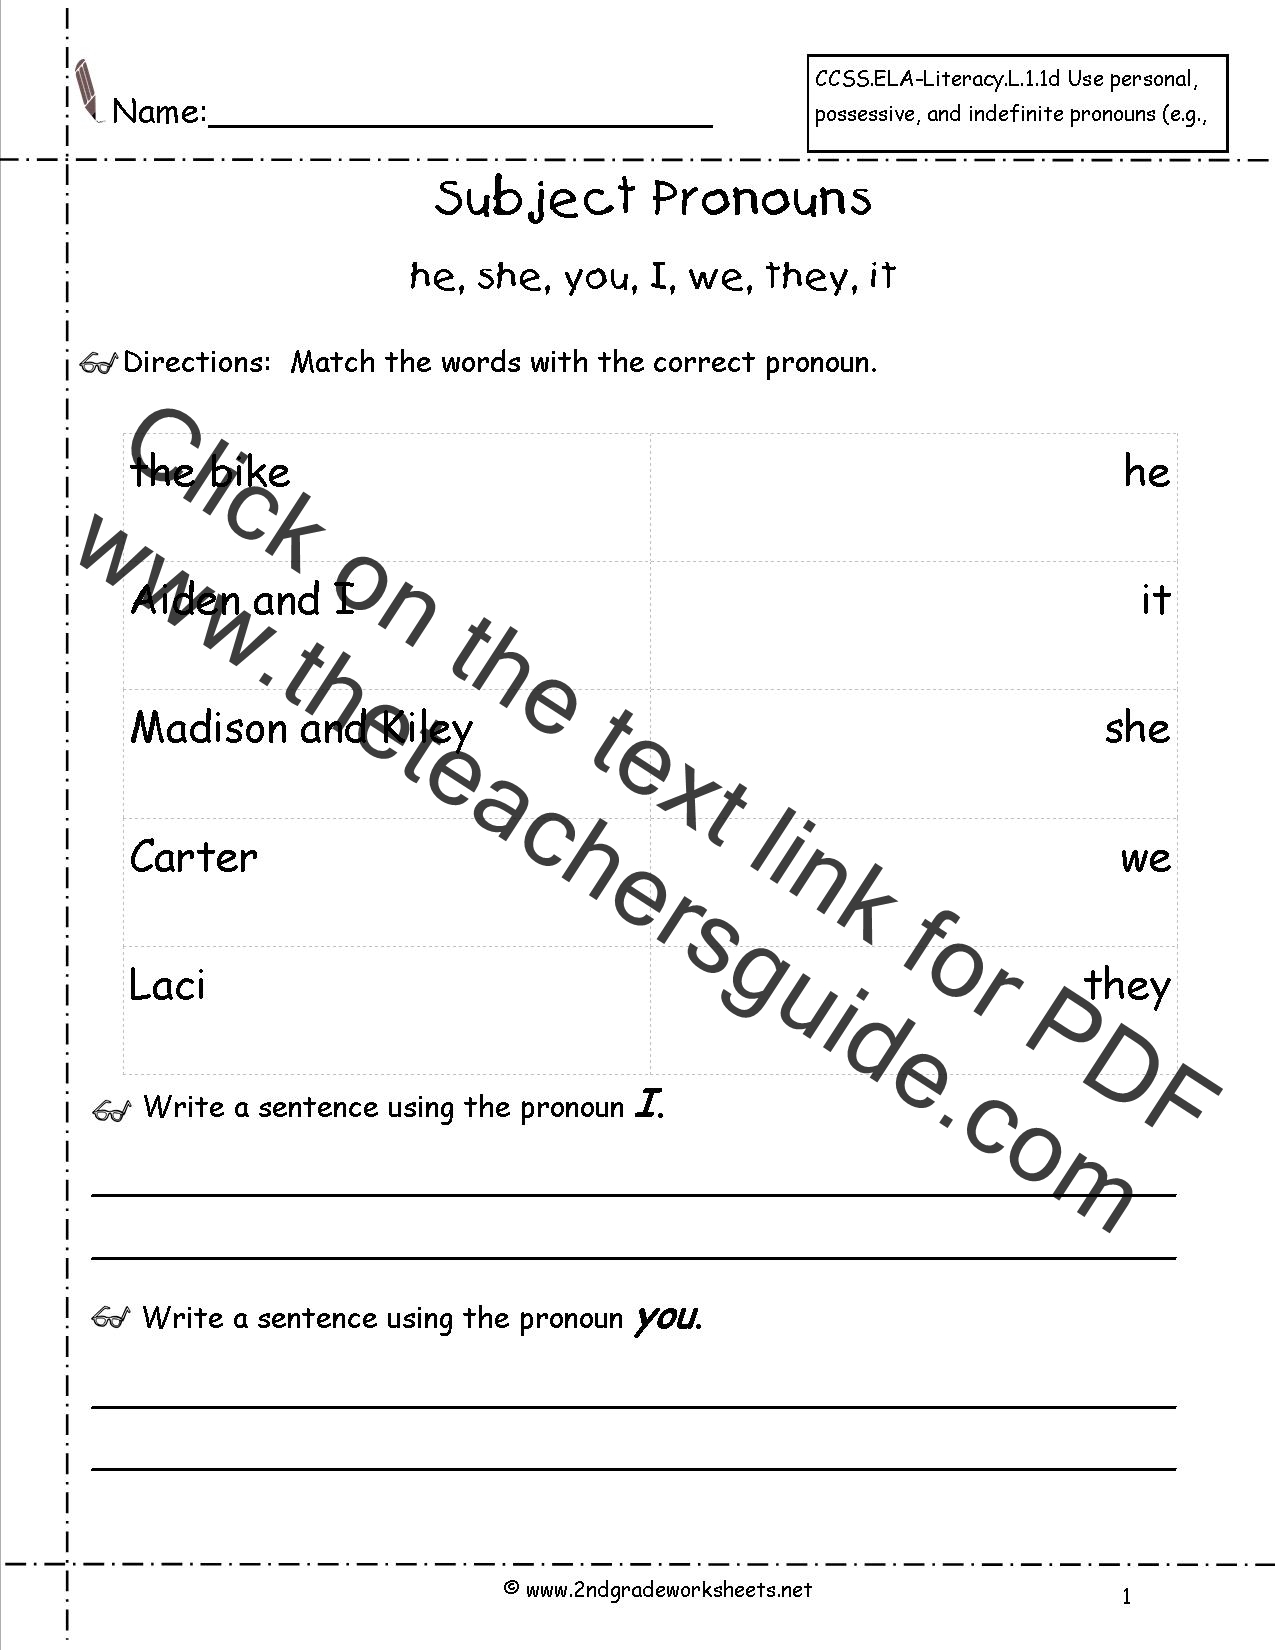 Pronouns Nouns Worksheets From The Teacher s Guide